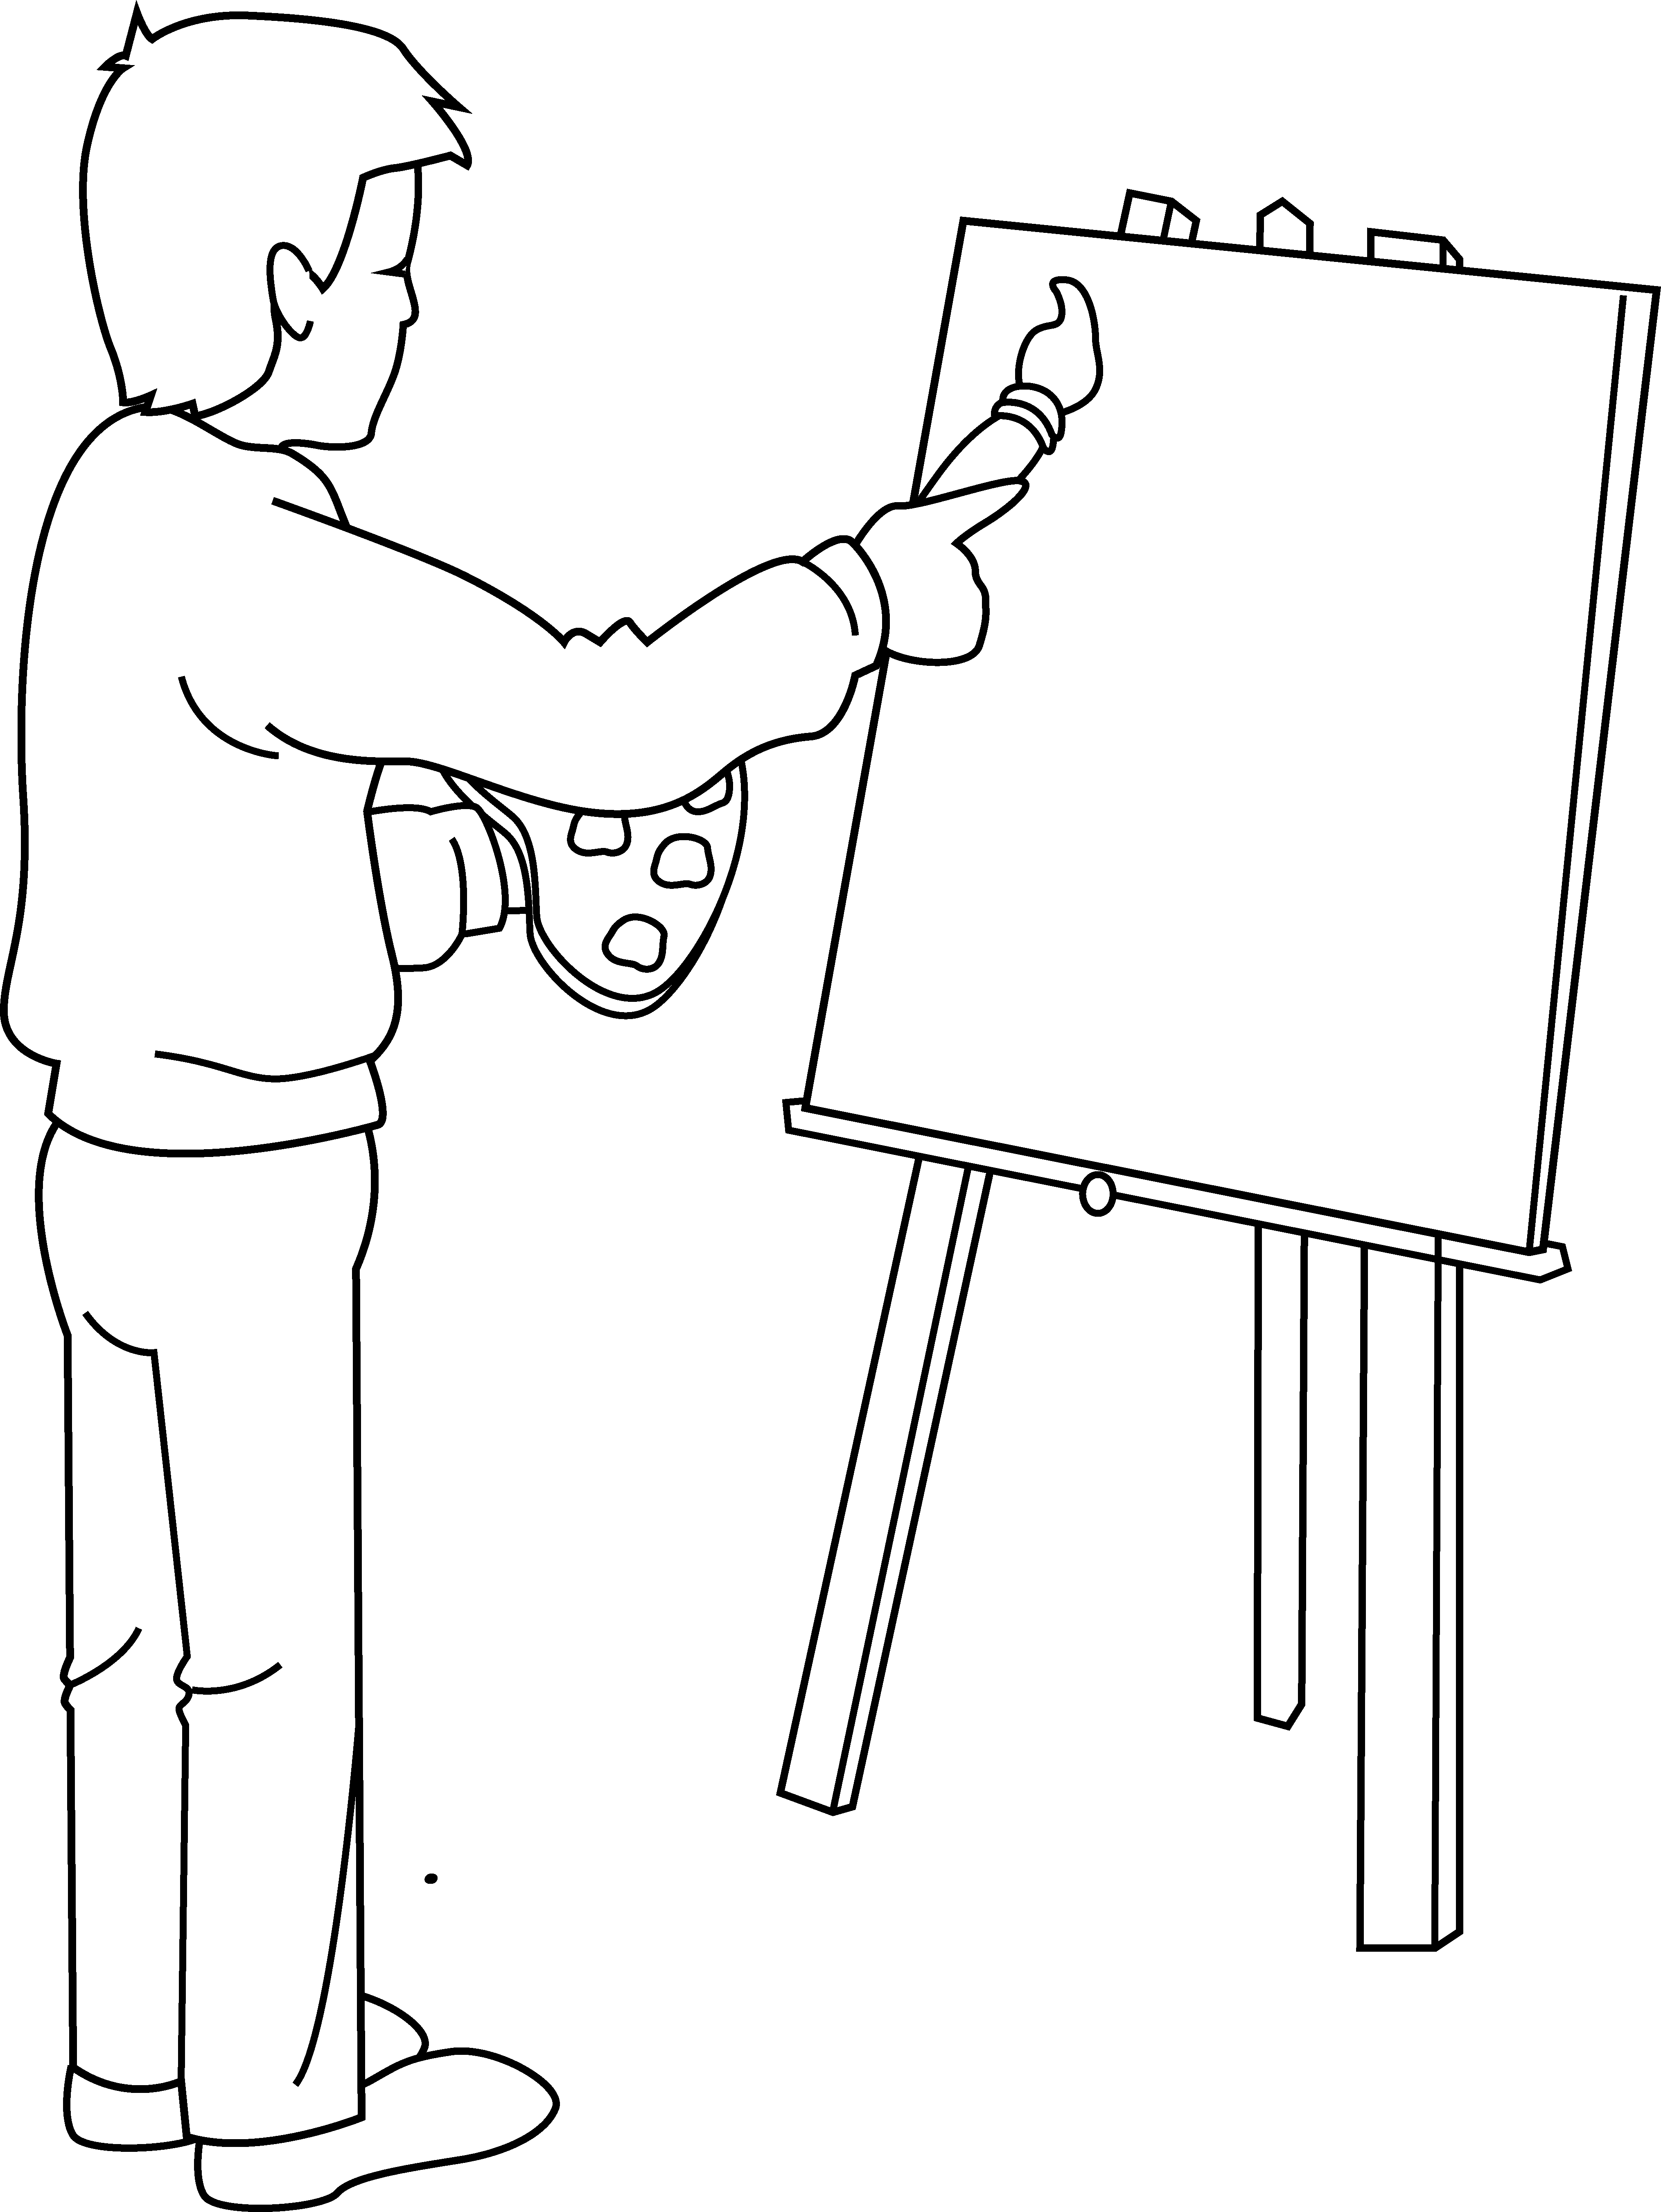 Coloring Page Of Artist Painting Cartoon Of Someone